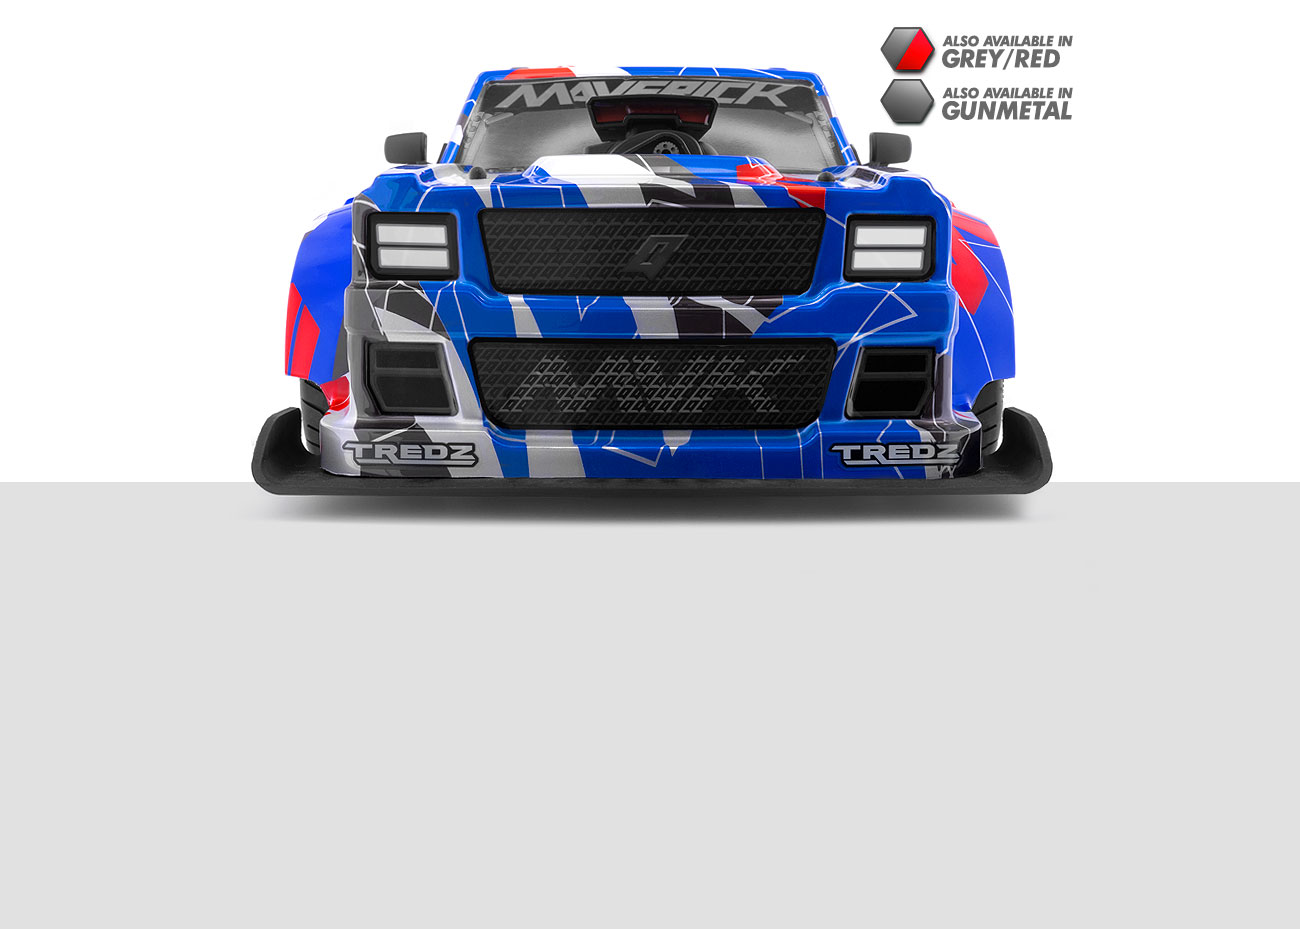 https://www.hpiracing.com/assets/images/kits/150312_x/qr_red_blue_front_view.jpg